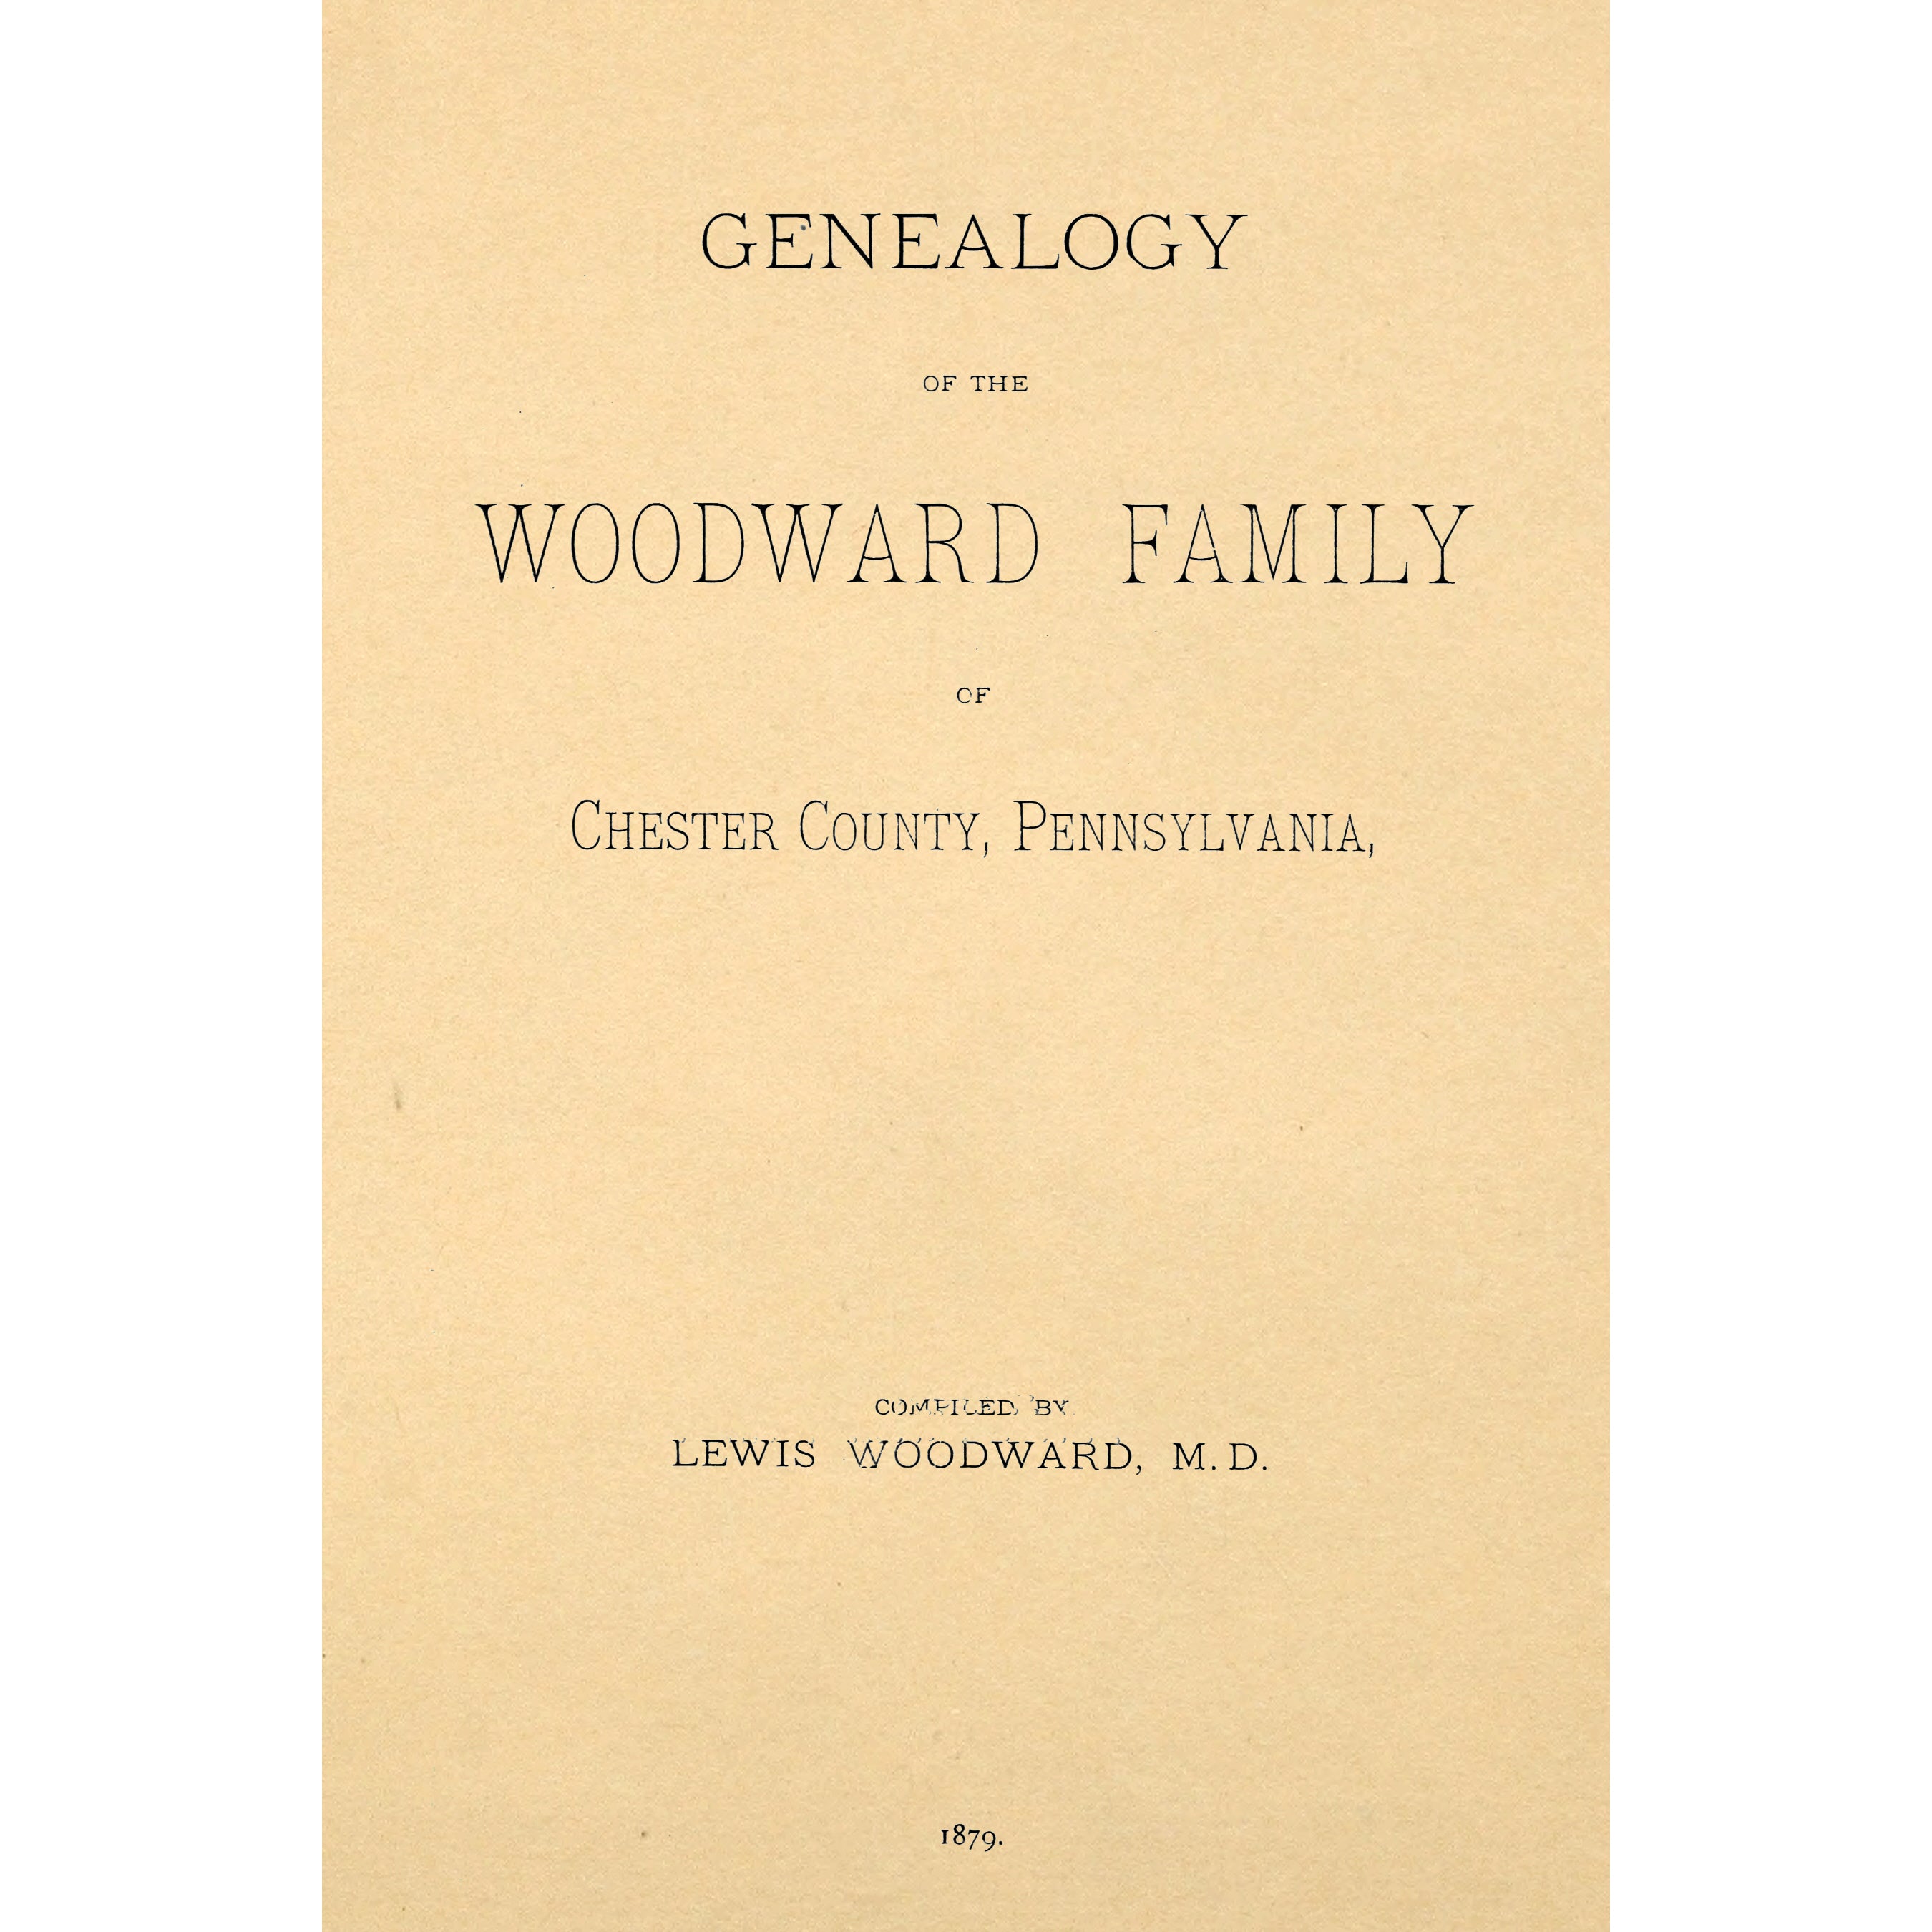 Genealogy of the Woodward family of Chester county, Pennsylvania,